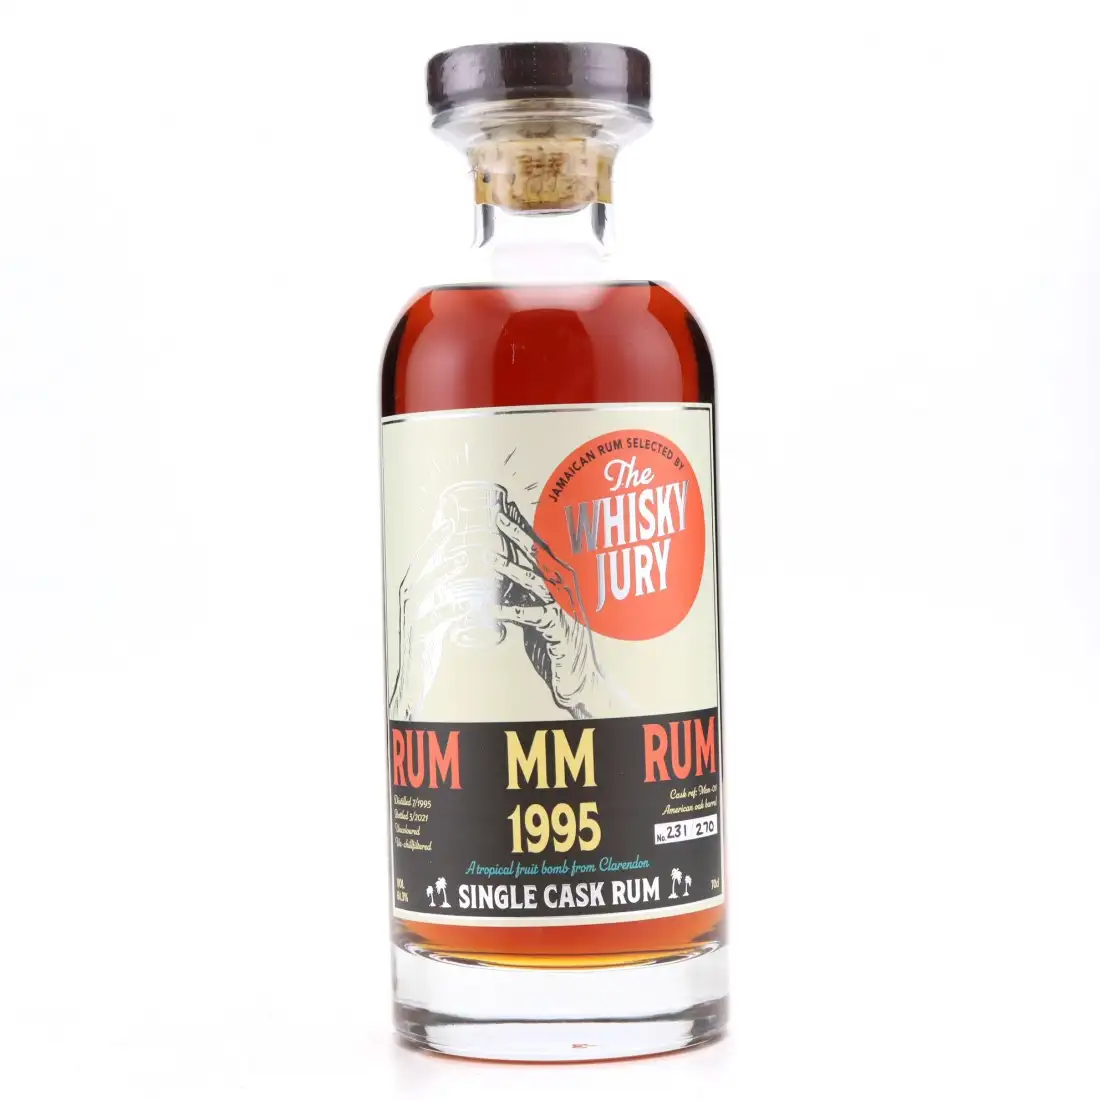 Image of the front of the bottle of the rum MM